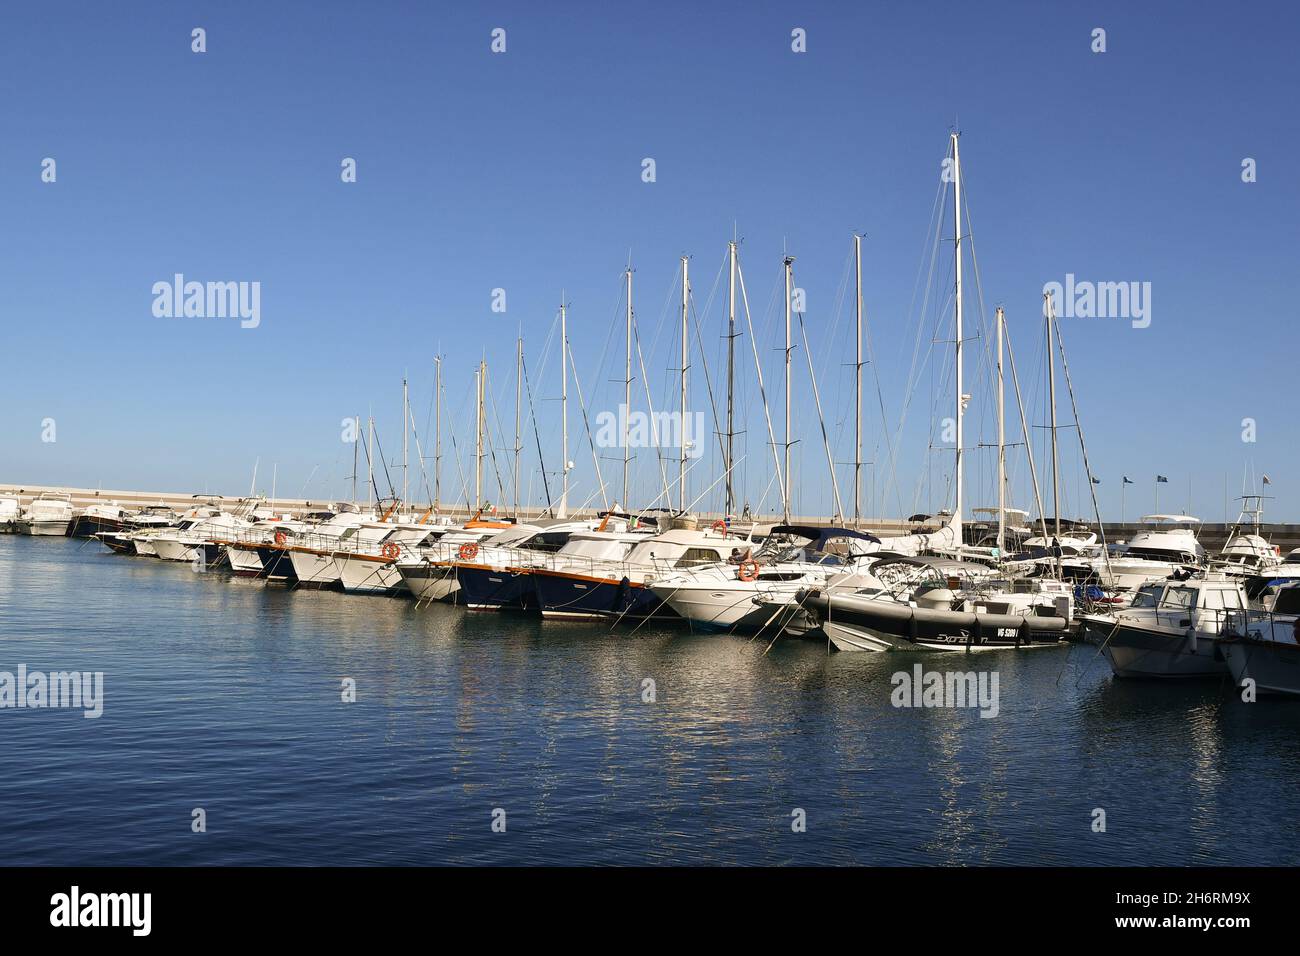 View of yachts and sailboats moored in the Marina of Alassio harbor of the Riviera of Ponente in summer, Alassio, Savona, Liguria, Italy Stock Photo